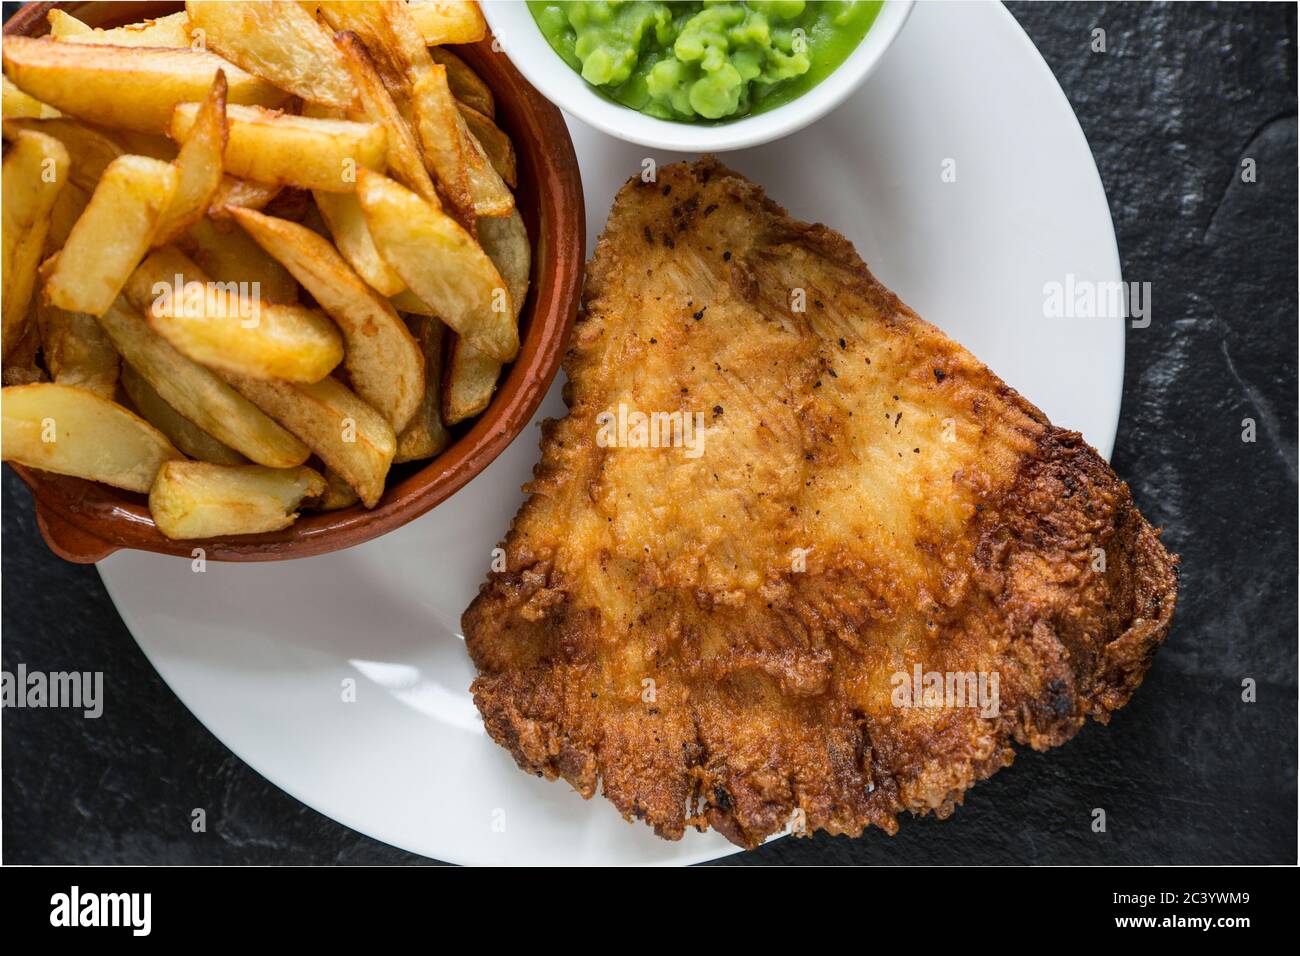 A home cooked portion of fish and chips with mushy peas. The fish is a deep fried, battered wing from a thornback ray, Raja clavata, and the chips are Stock Photo